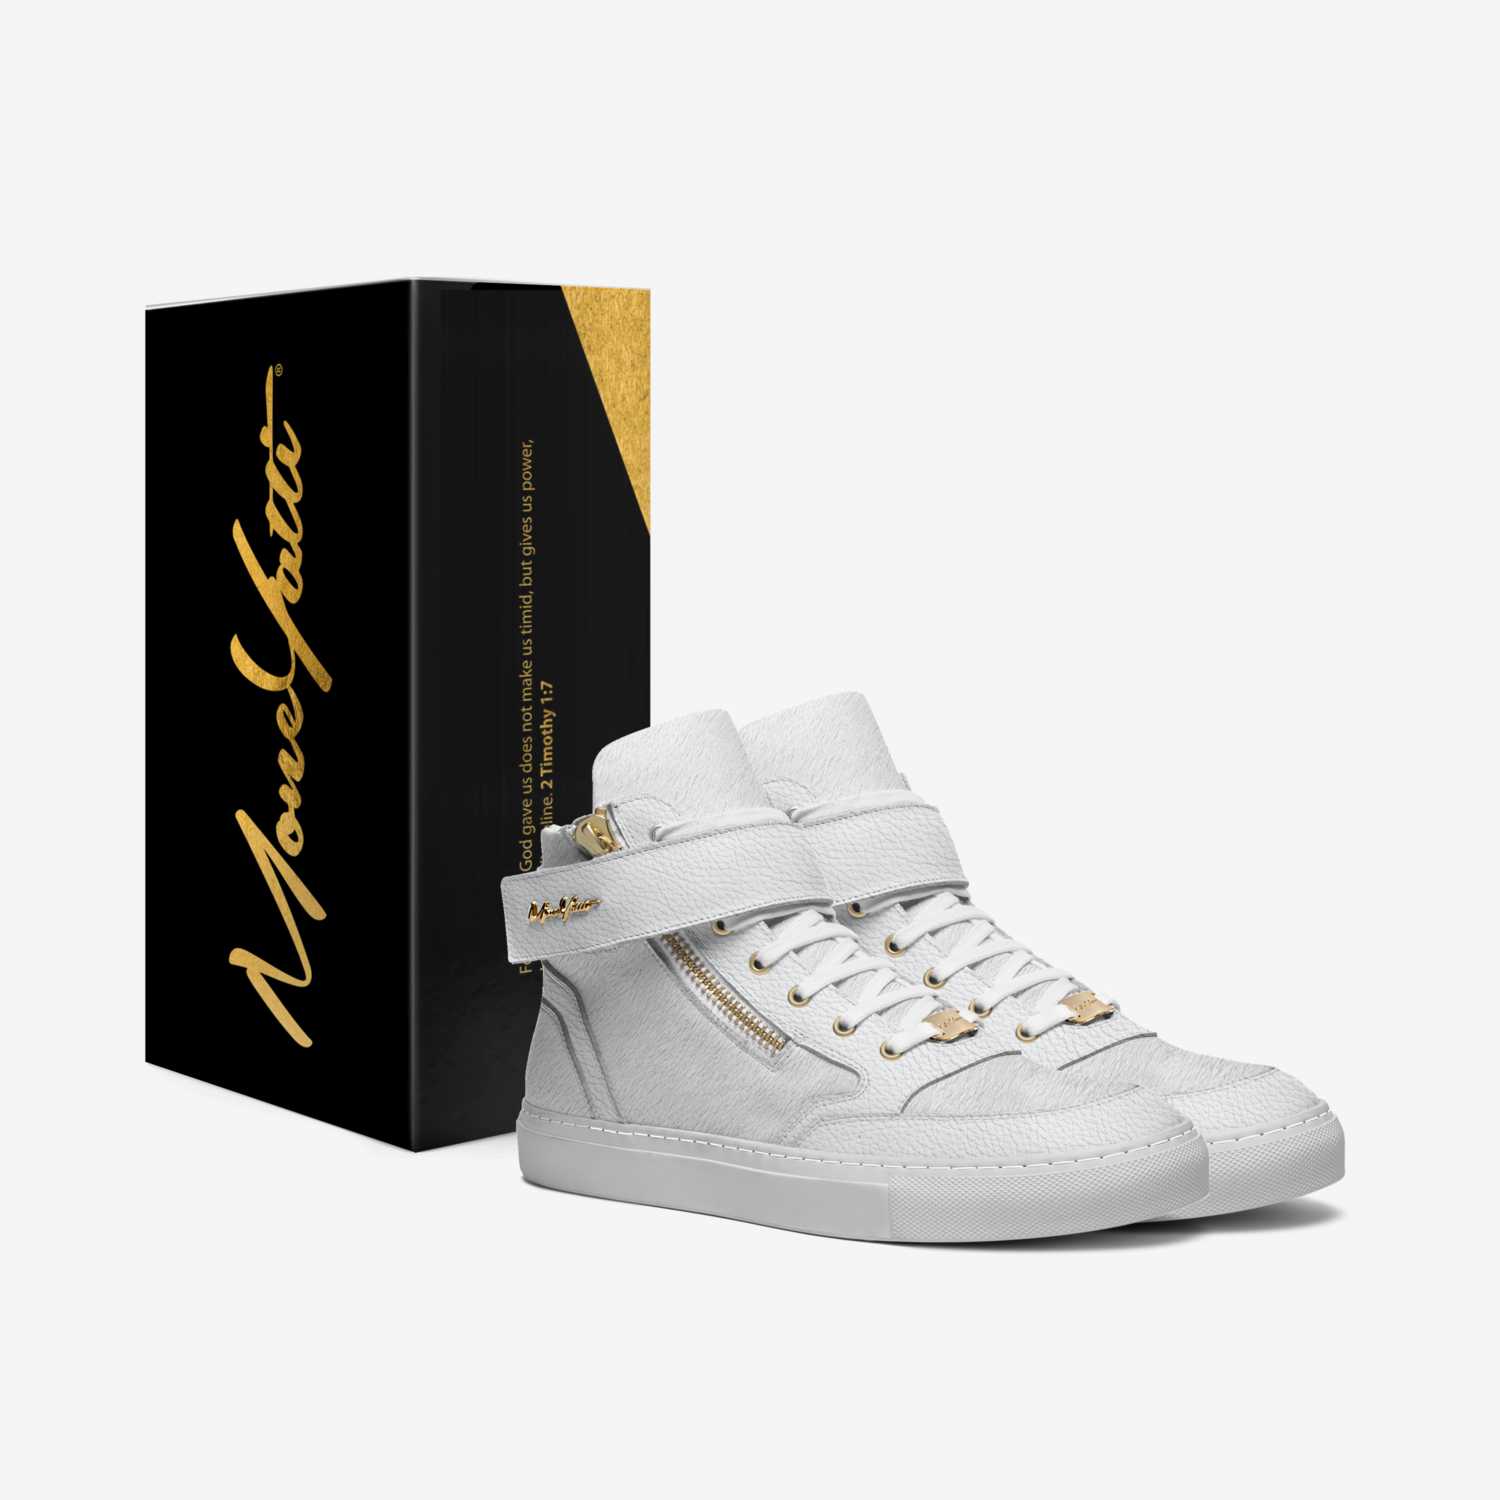  MCLASSIC PONY 005 custom made in Italy shoes by Moneyatti Brand | Box view